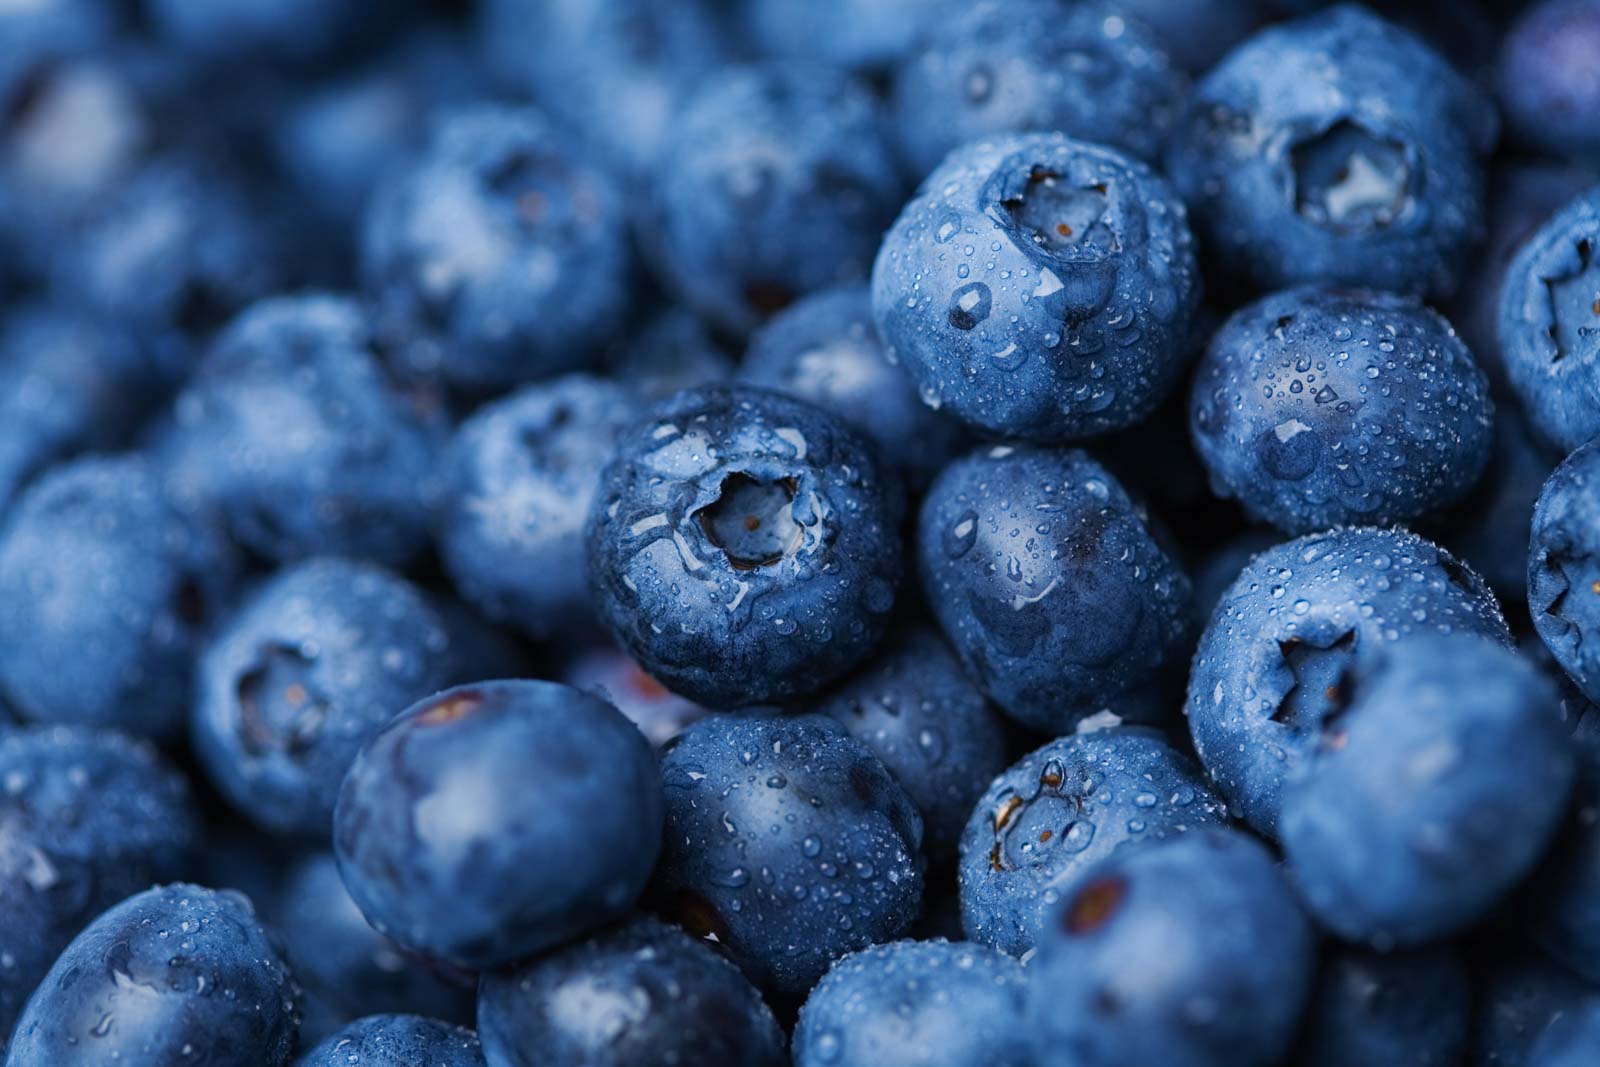 harvested blueberries whose quality shows the efficacy of Maxstim biostimulants